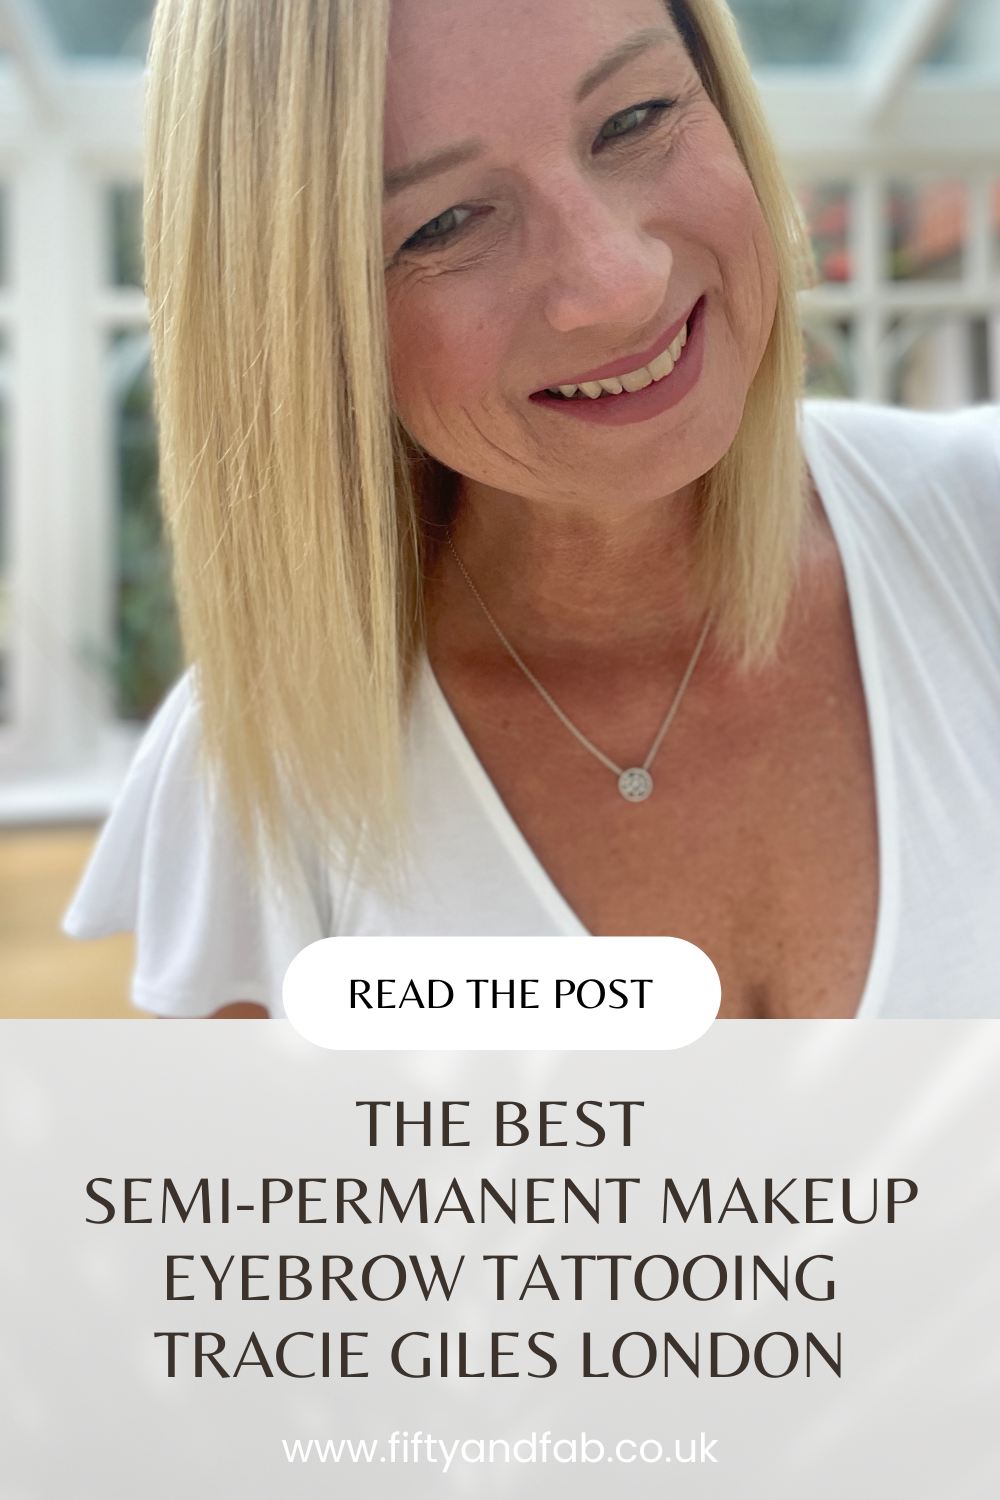 the best semi permanent makeup | eyebrow tattooing at tracie giles london